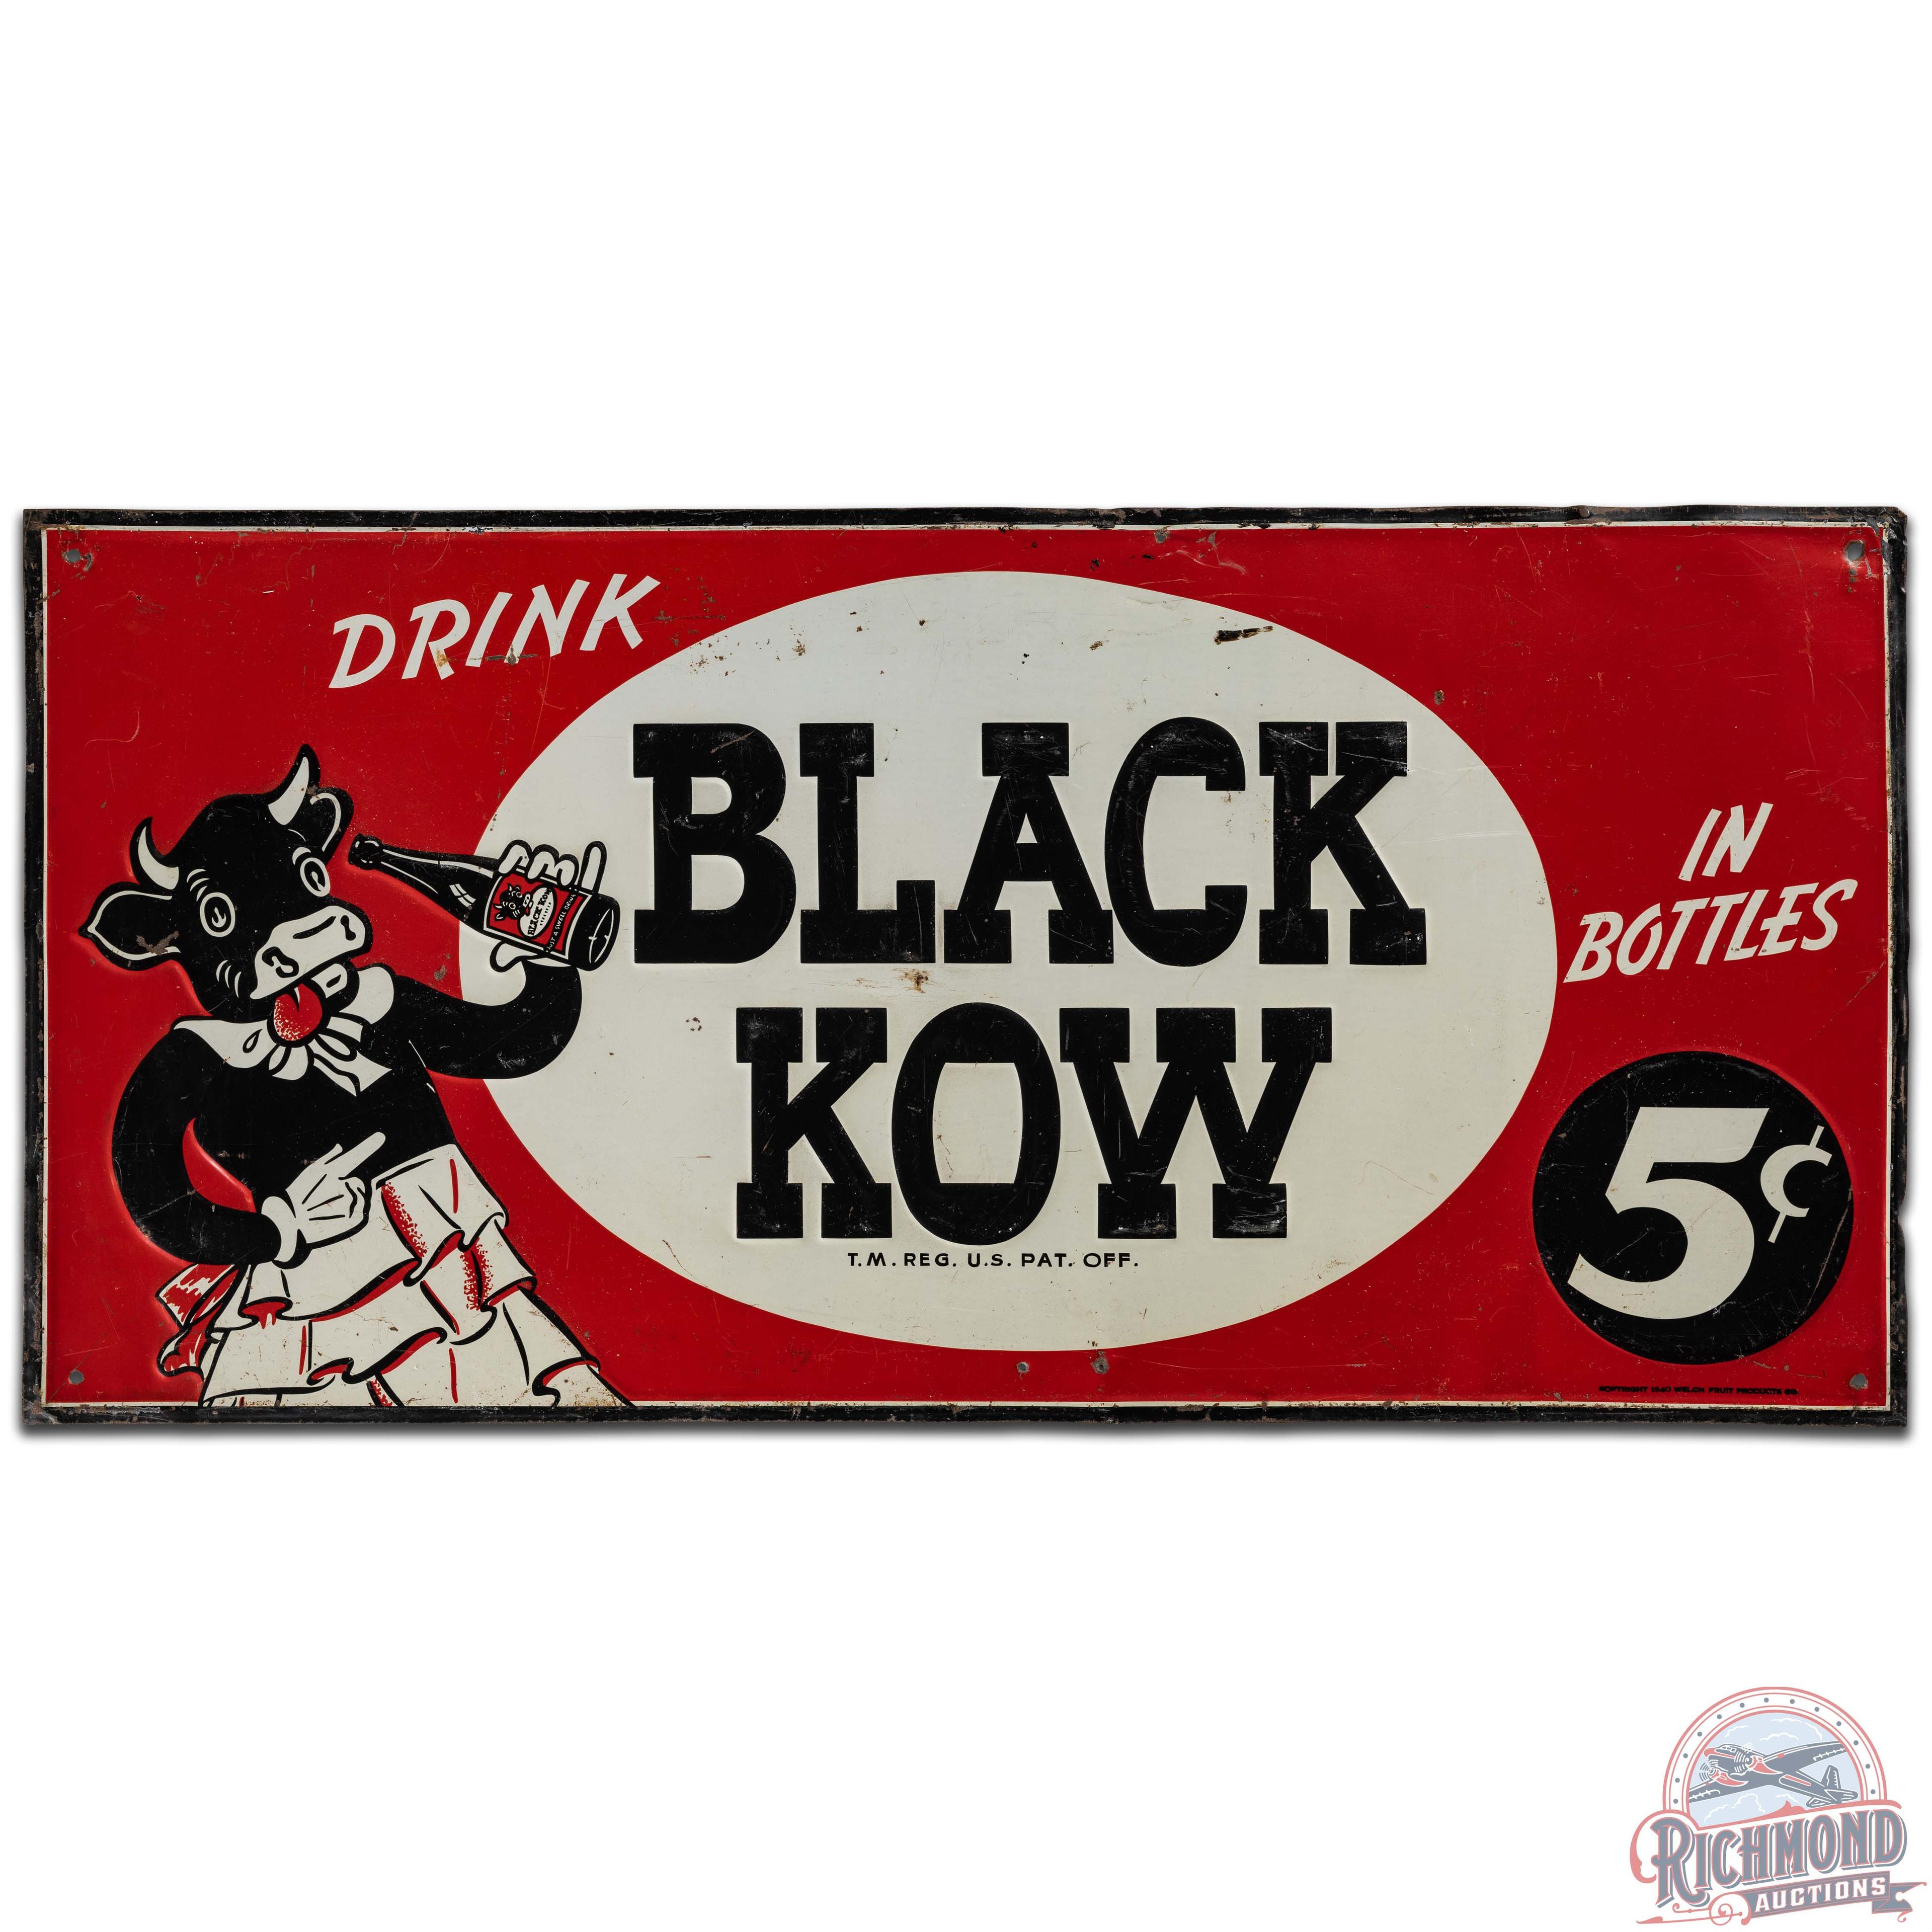 Drink Black Kow "In Bottles" 5 Cents Emb. SS Tin Sign